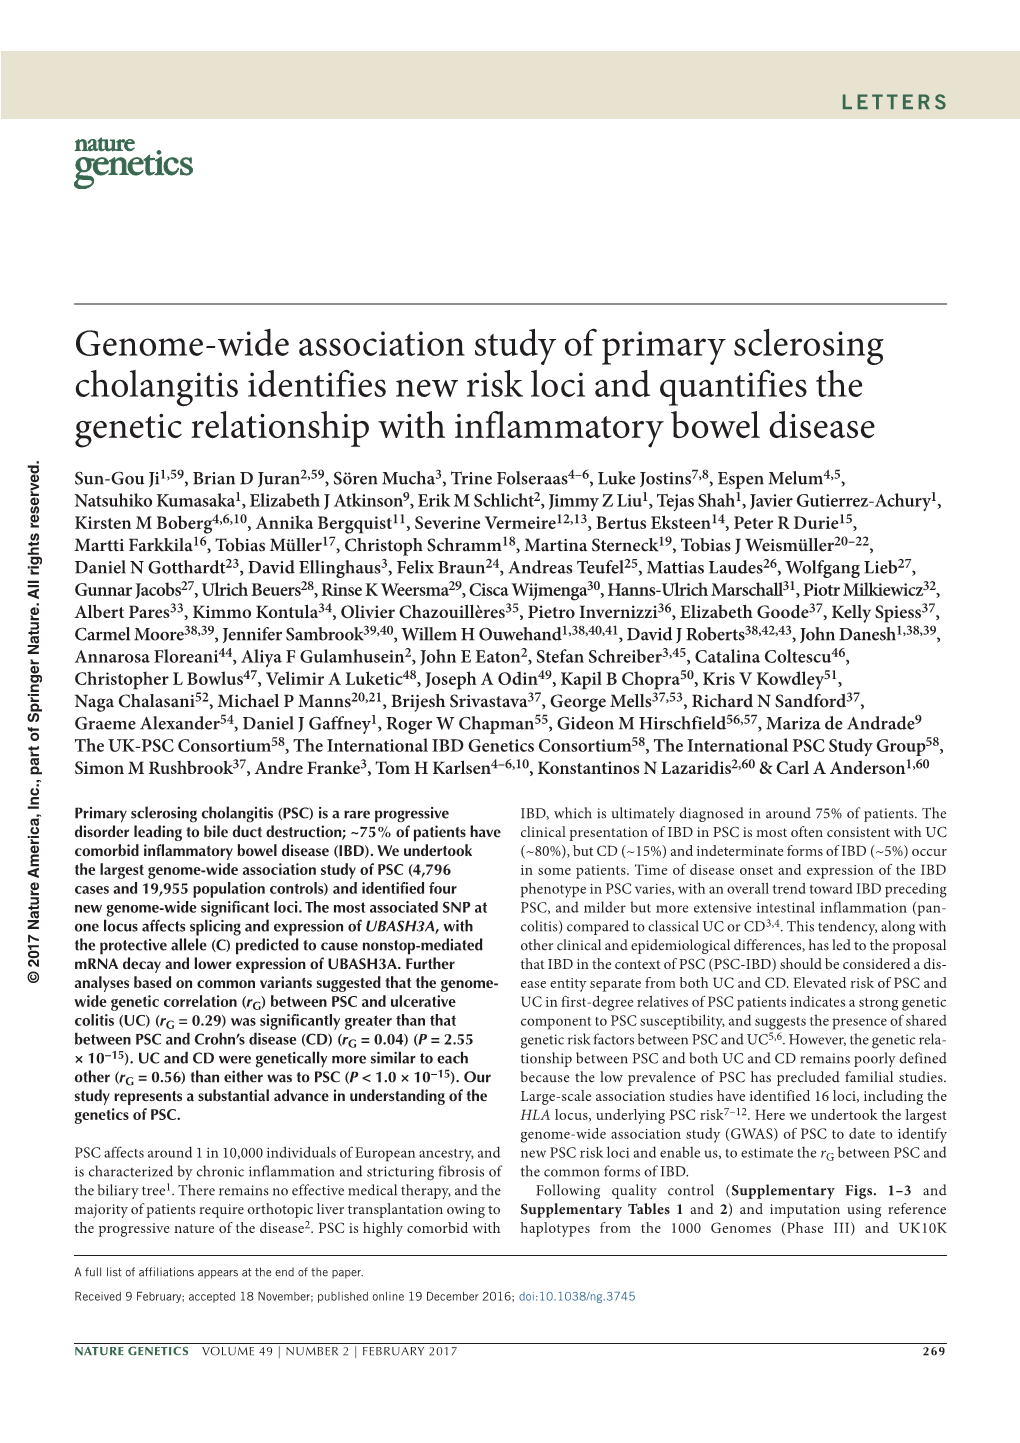 Genome-Wide Association Study of Primary Sclerosing Cholangitis Identifies New Risk Loci and Quantifies the Genetic Relationship with Inflammatory Bowel Disease